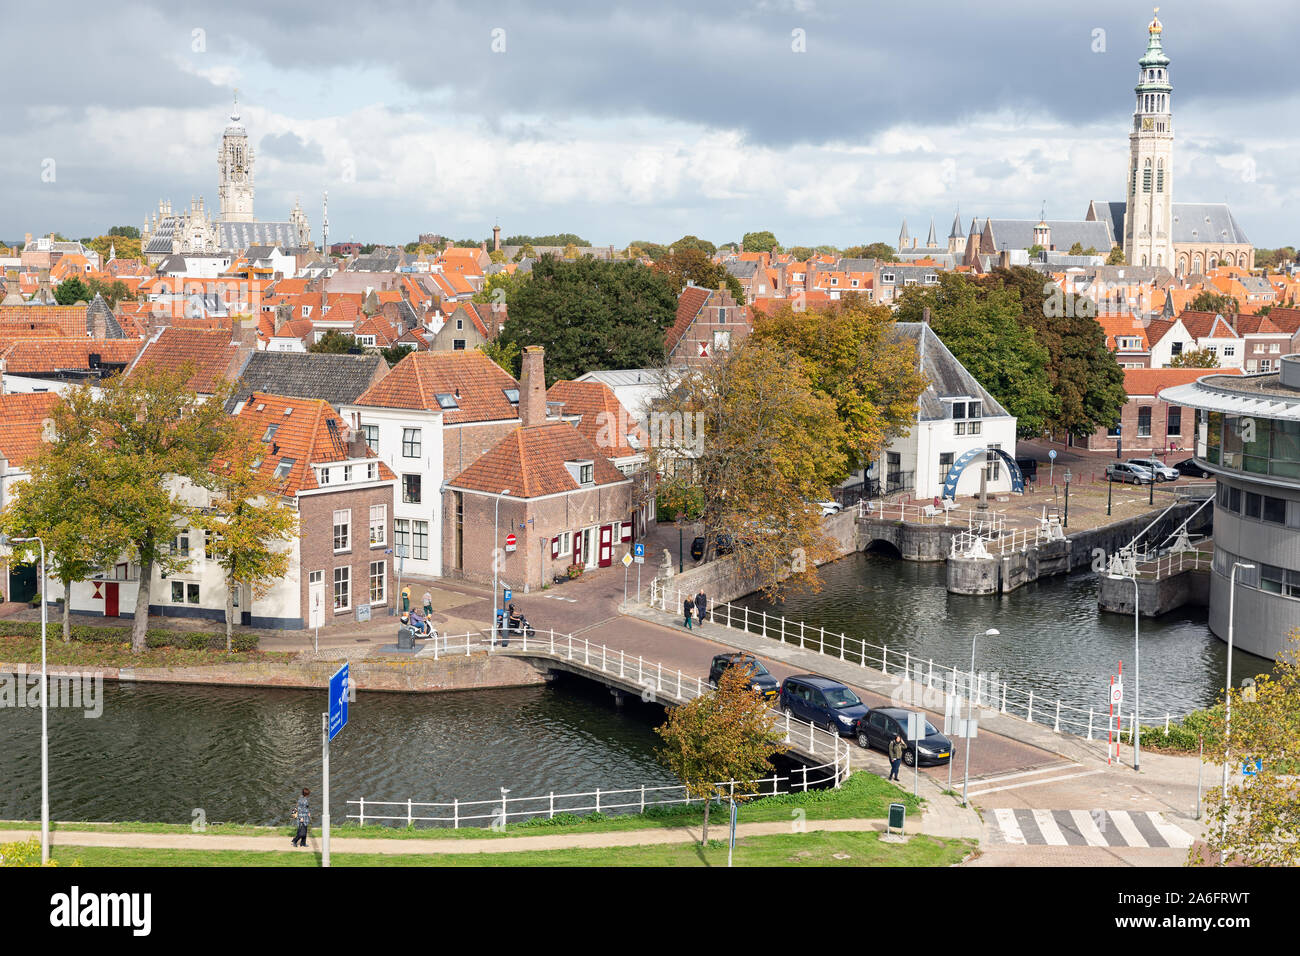 Aerial view medieval city Middelburg, the Netherlands Stock Photo